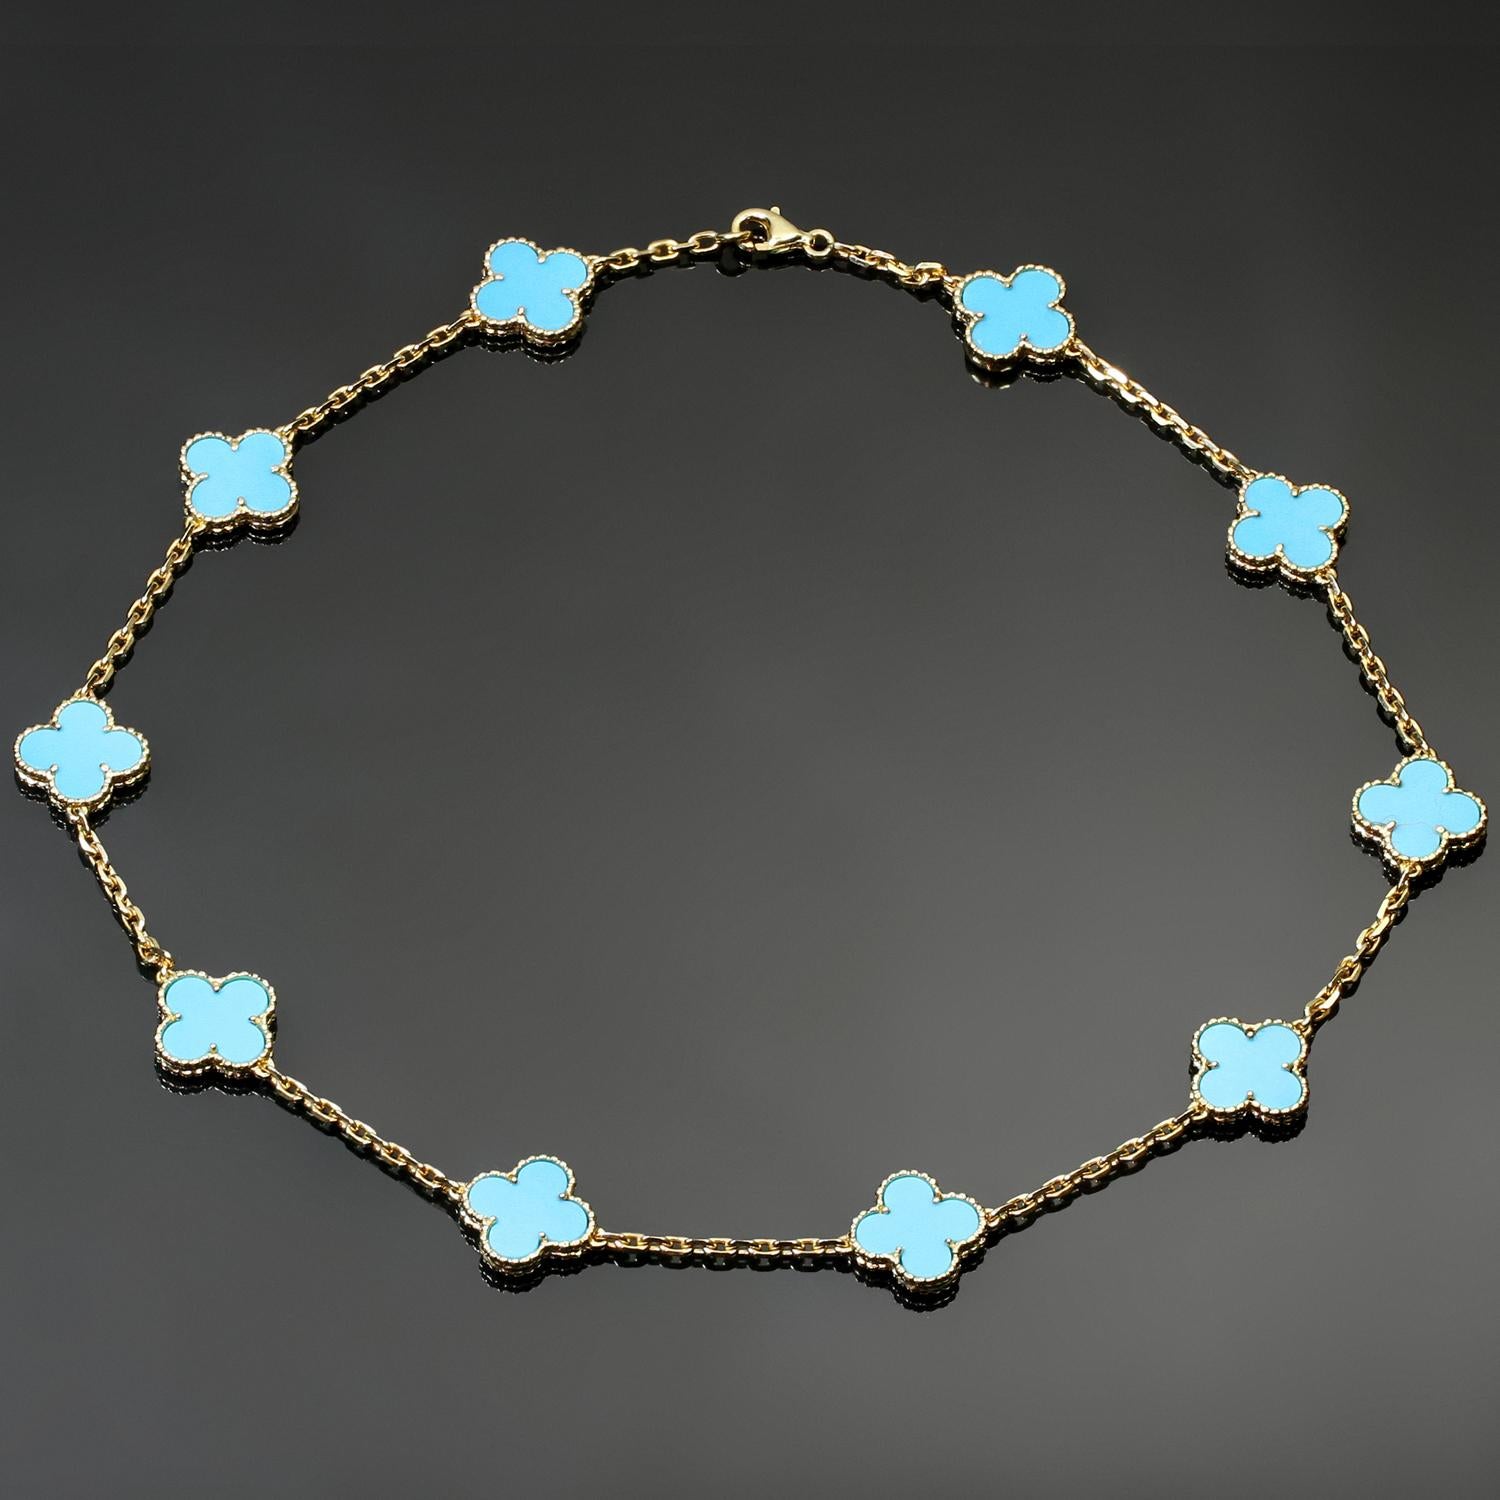 This very rare Van Cleef & Arpels necklace from the iconic Vintage Alhambra collection is crafted in 18k yellow gold and features 10 lucky clover motifs beautifully inlaid with blue turquoise in round bead settings. Made in France circa 2000s.